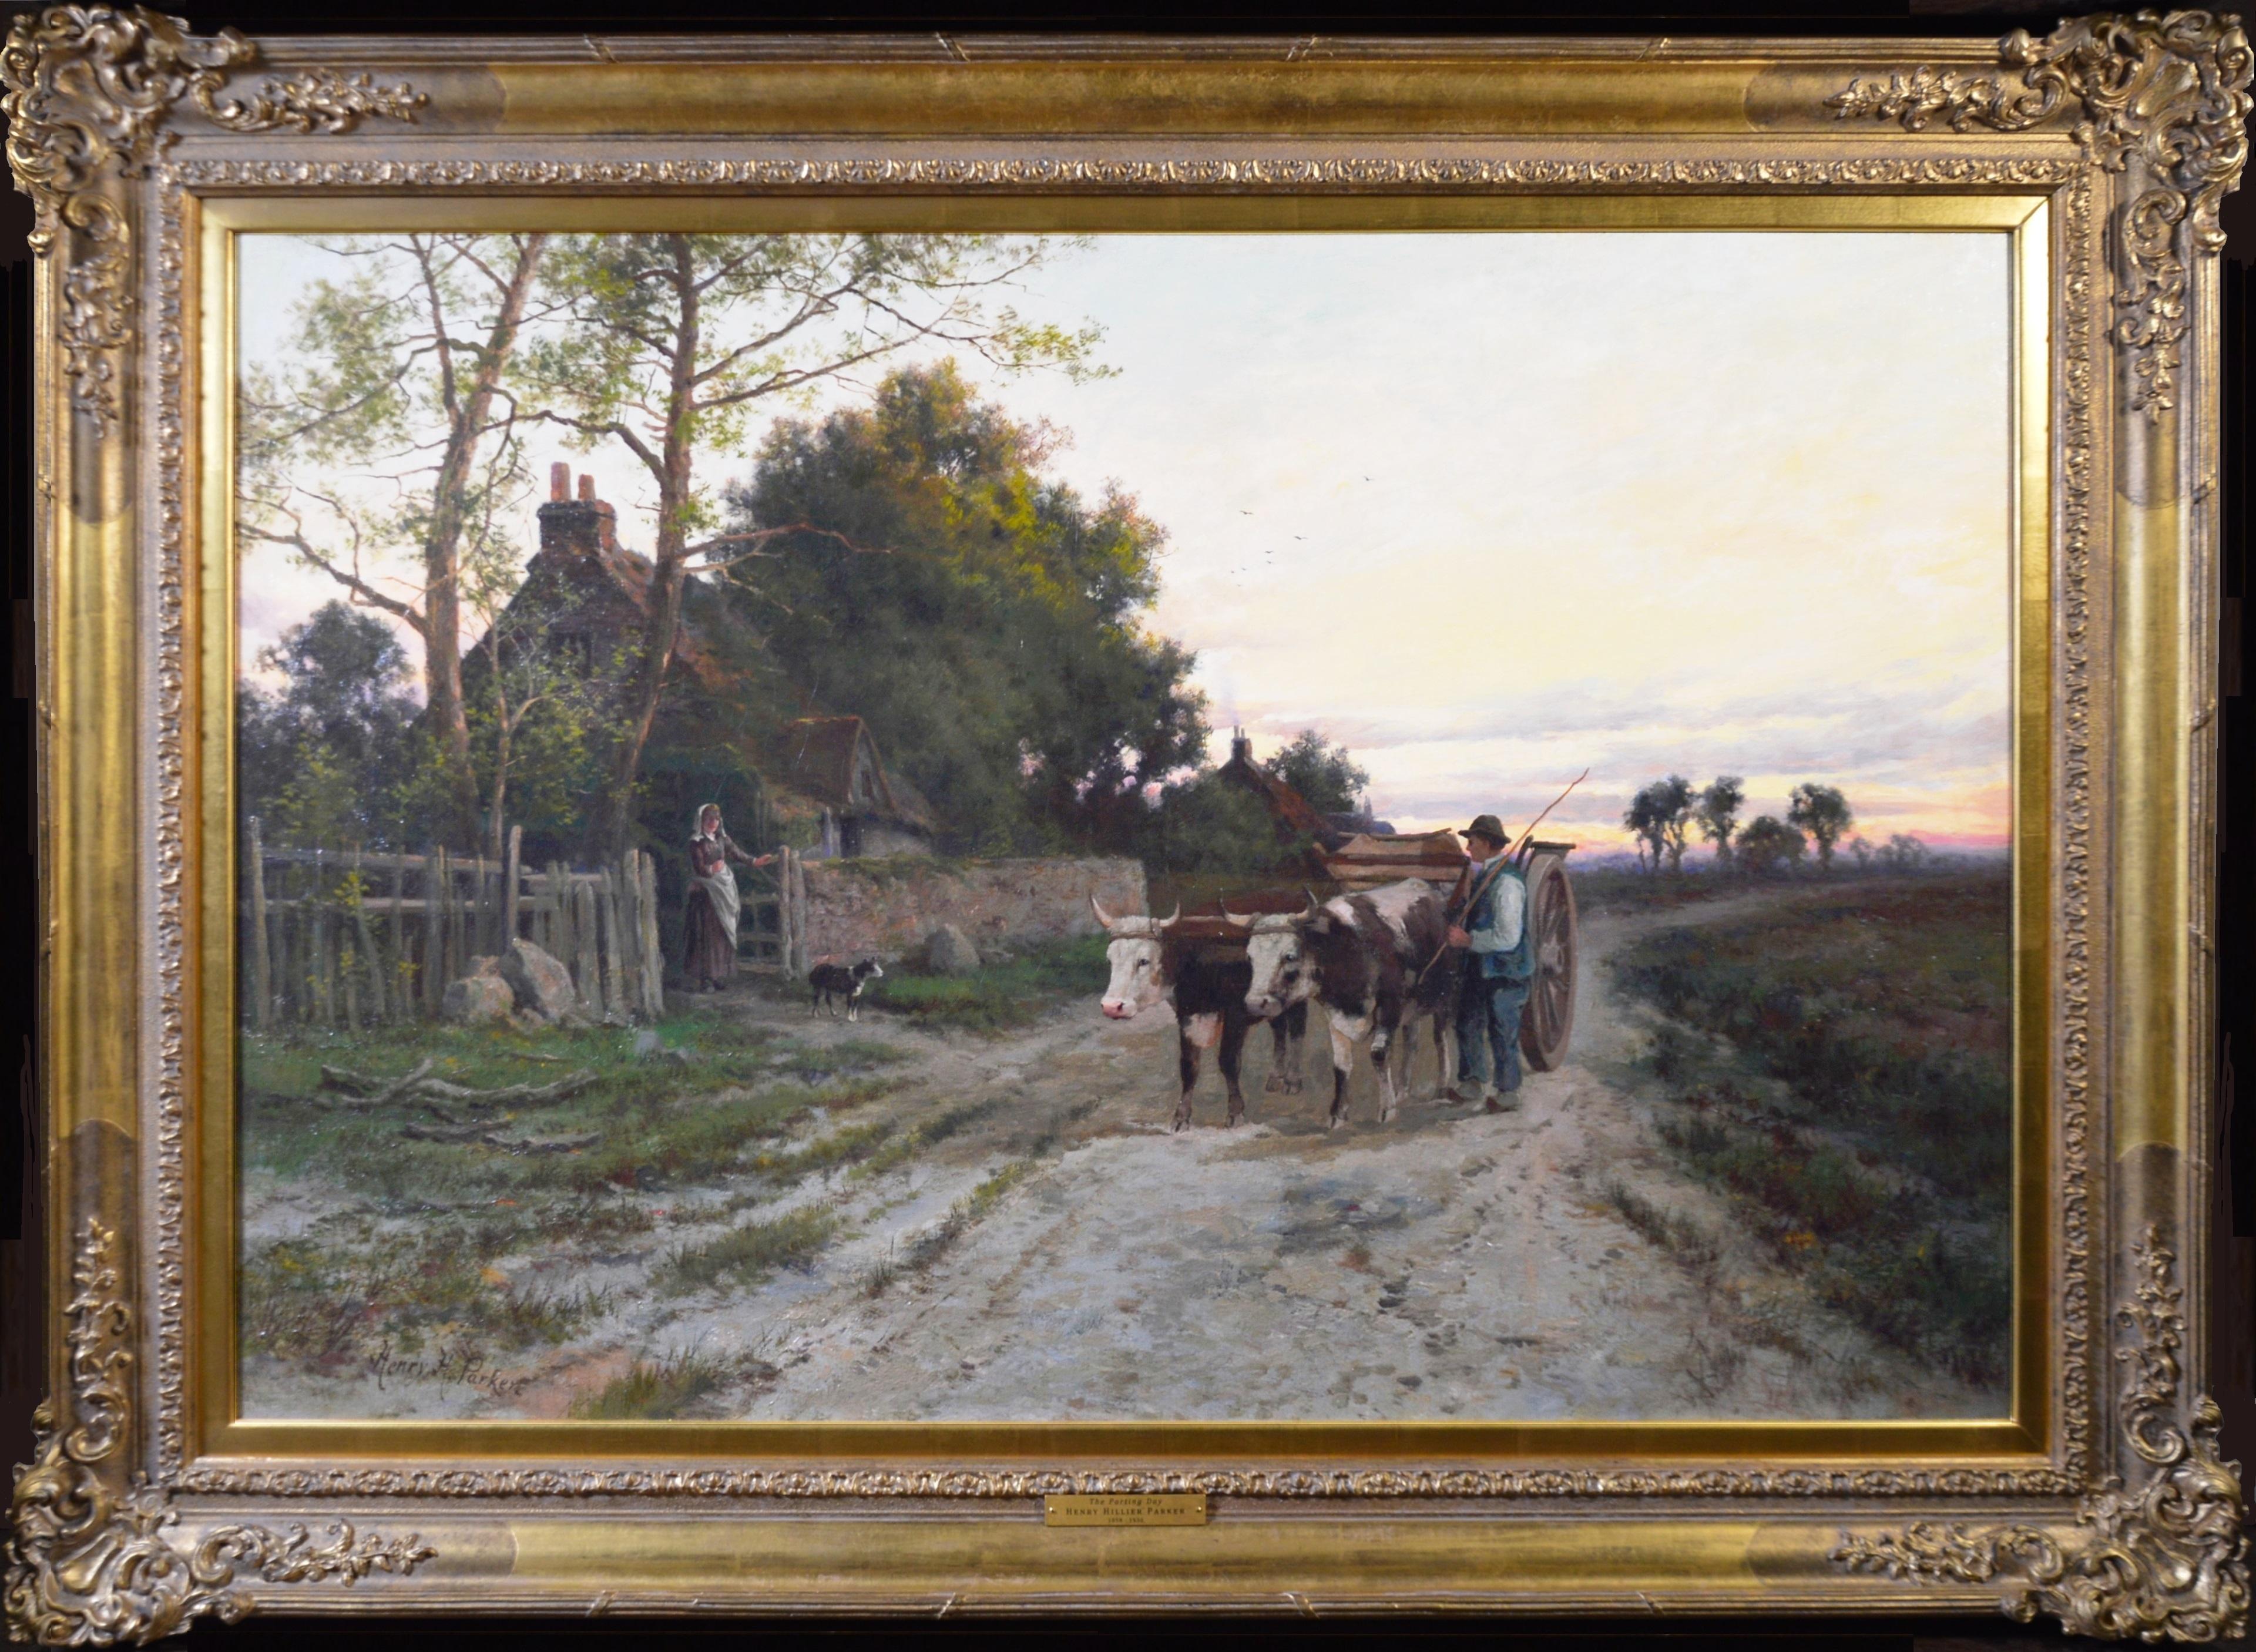 'The Parting Day’ by Henry H Parker (1858-1930). The painting – which depicts figures and cattle on a country lane at sunset – is signed by the artist and hangs in a good quality giltwood frame.

Academy Fine Paintings only offers artwork for sale